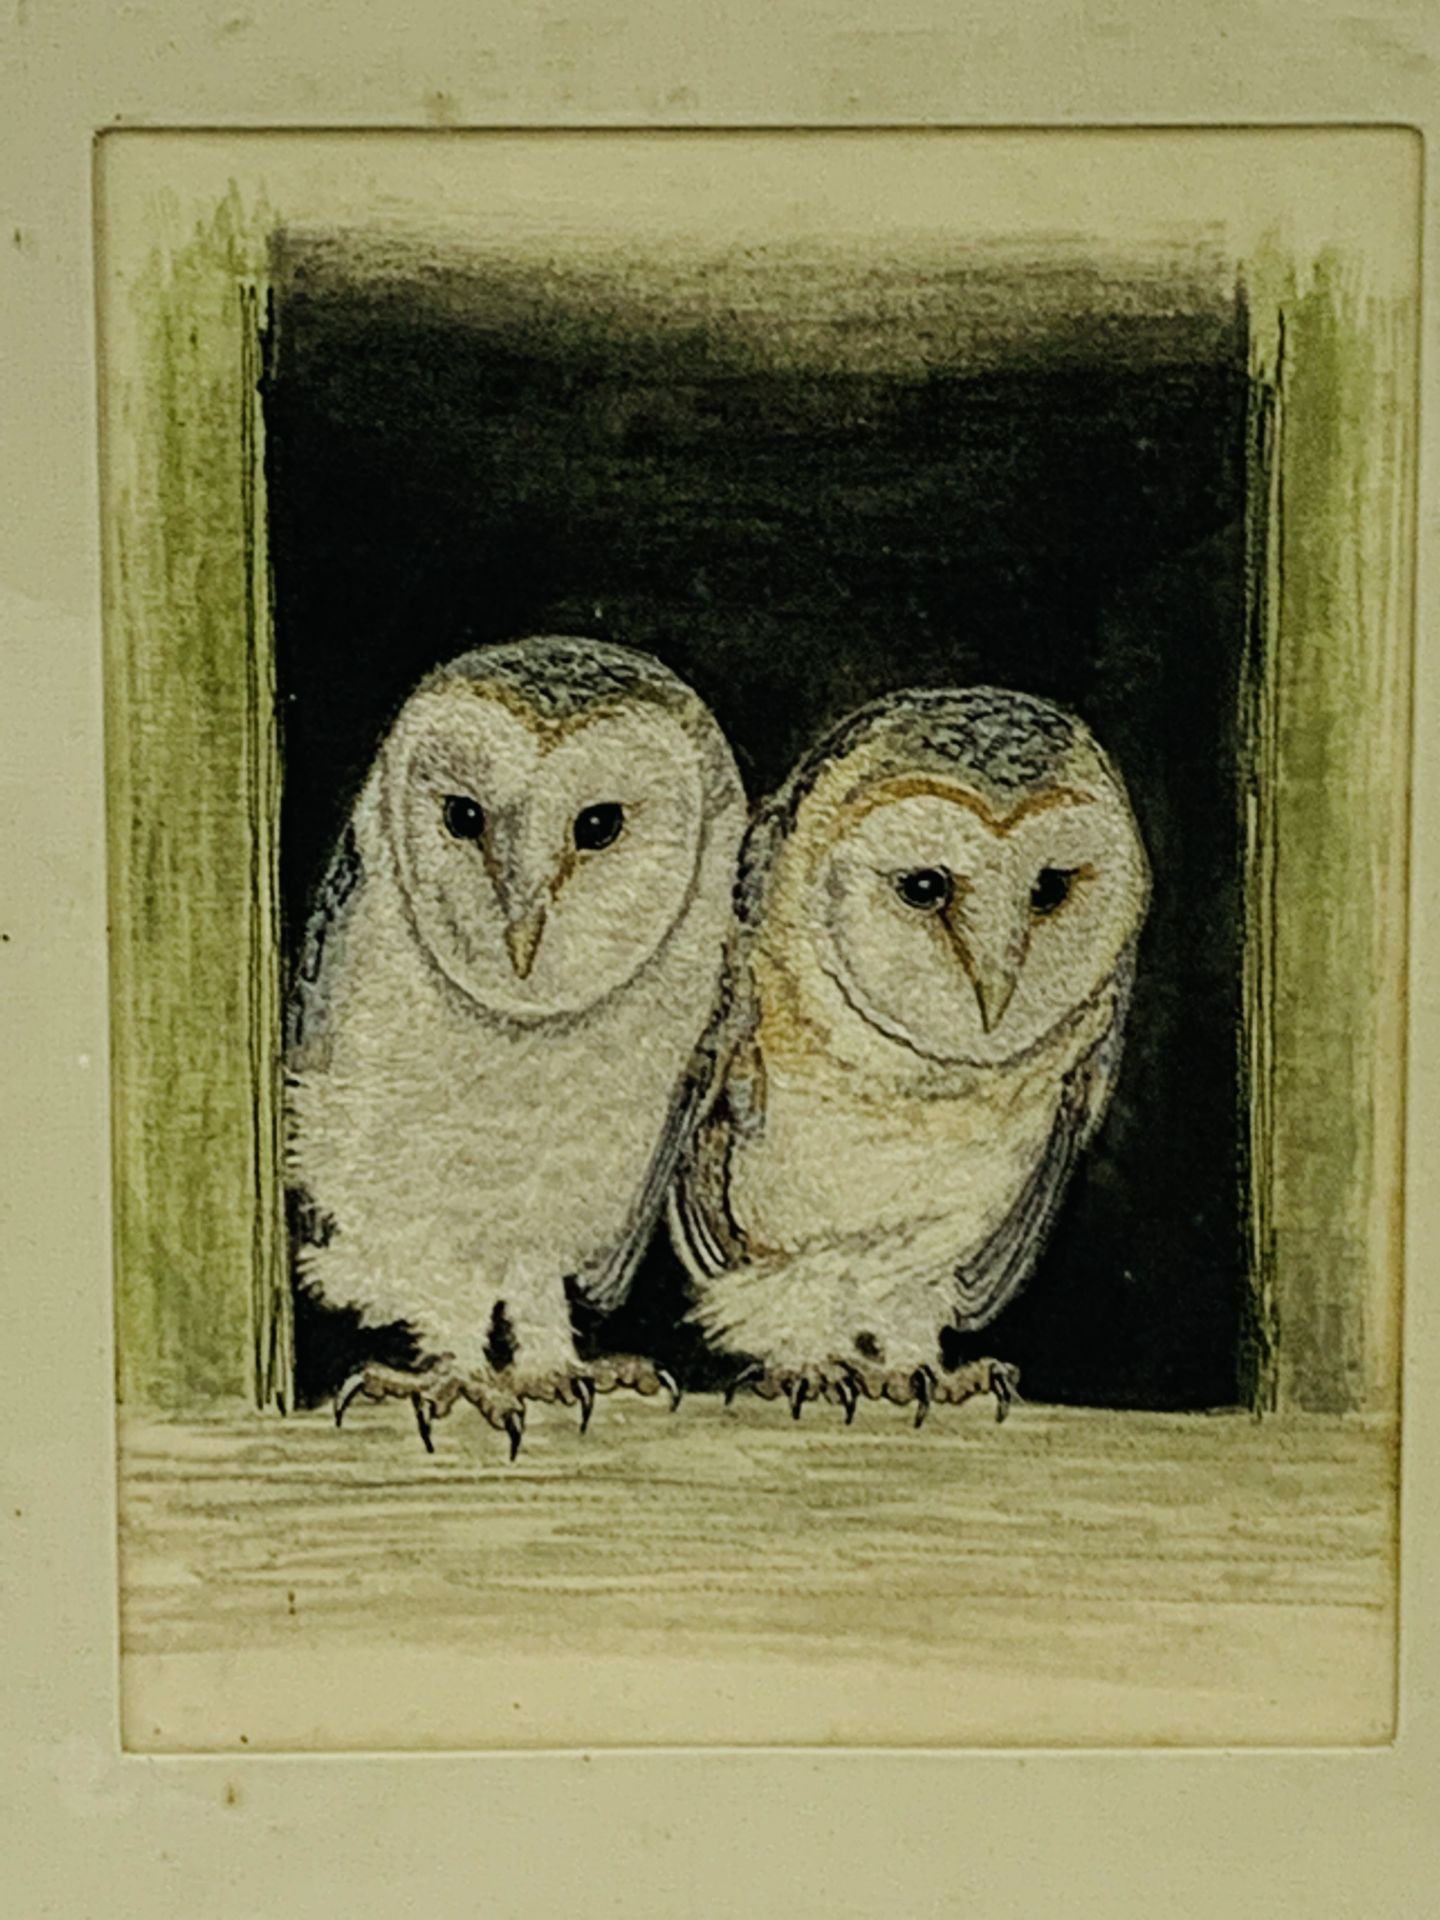 Watercolour and embroidery "Fledgling Barn Owls" by Cathy Silvester, and a print "Barn Owl II",